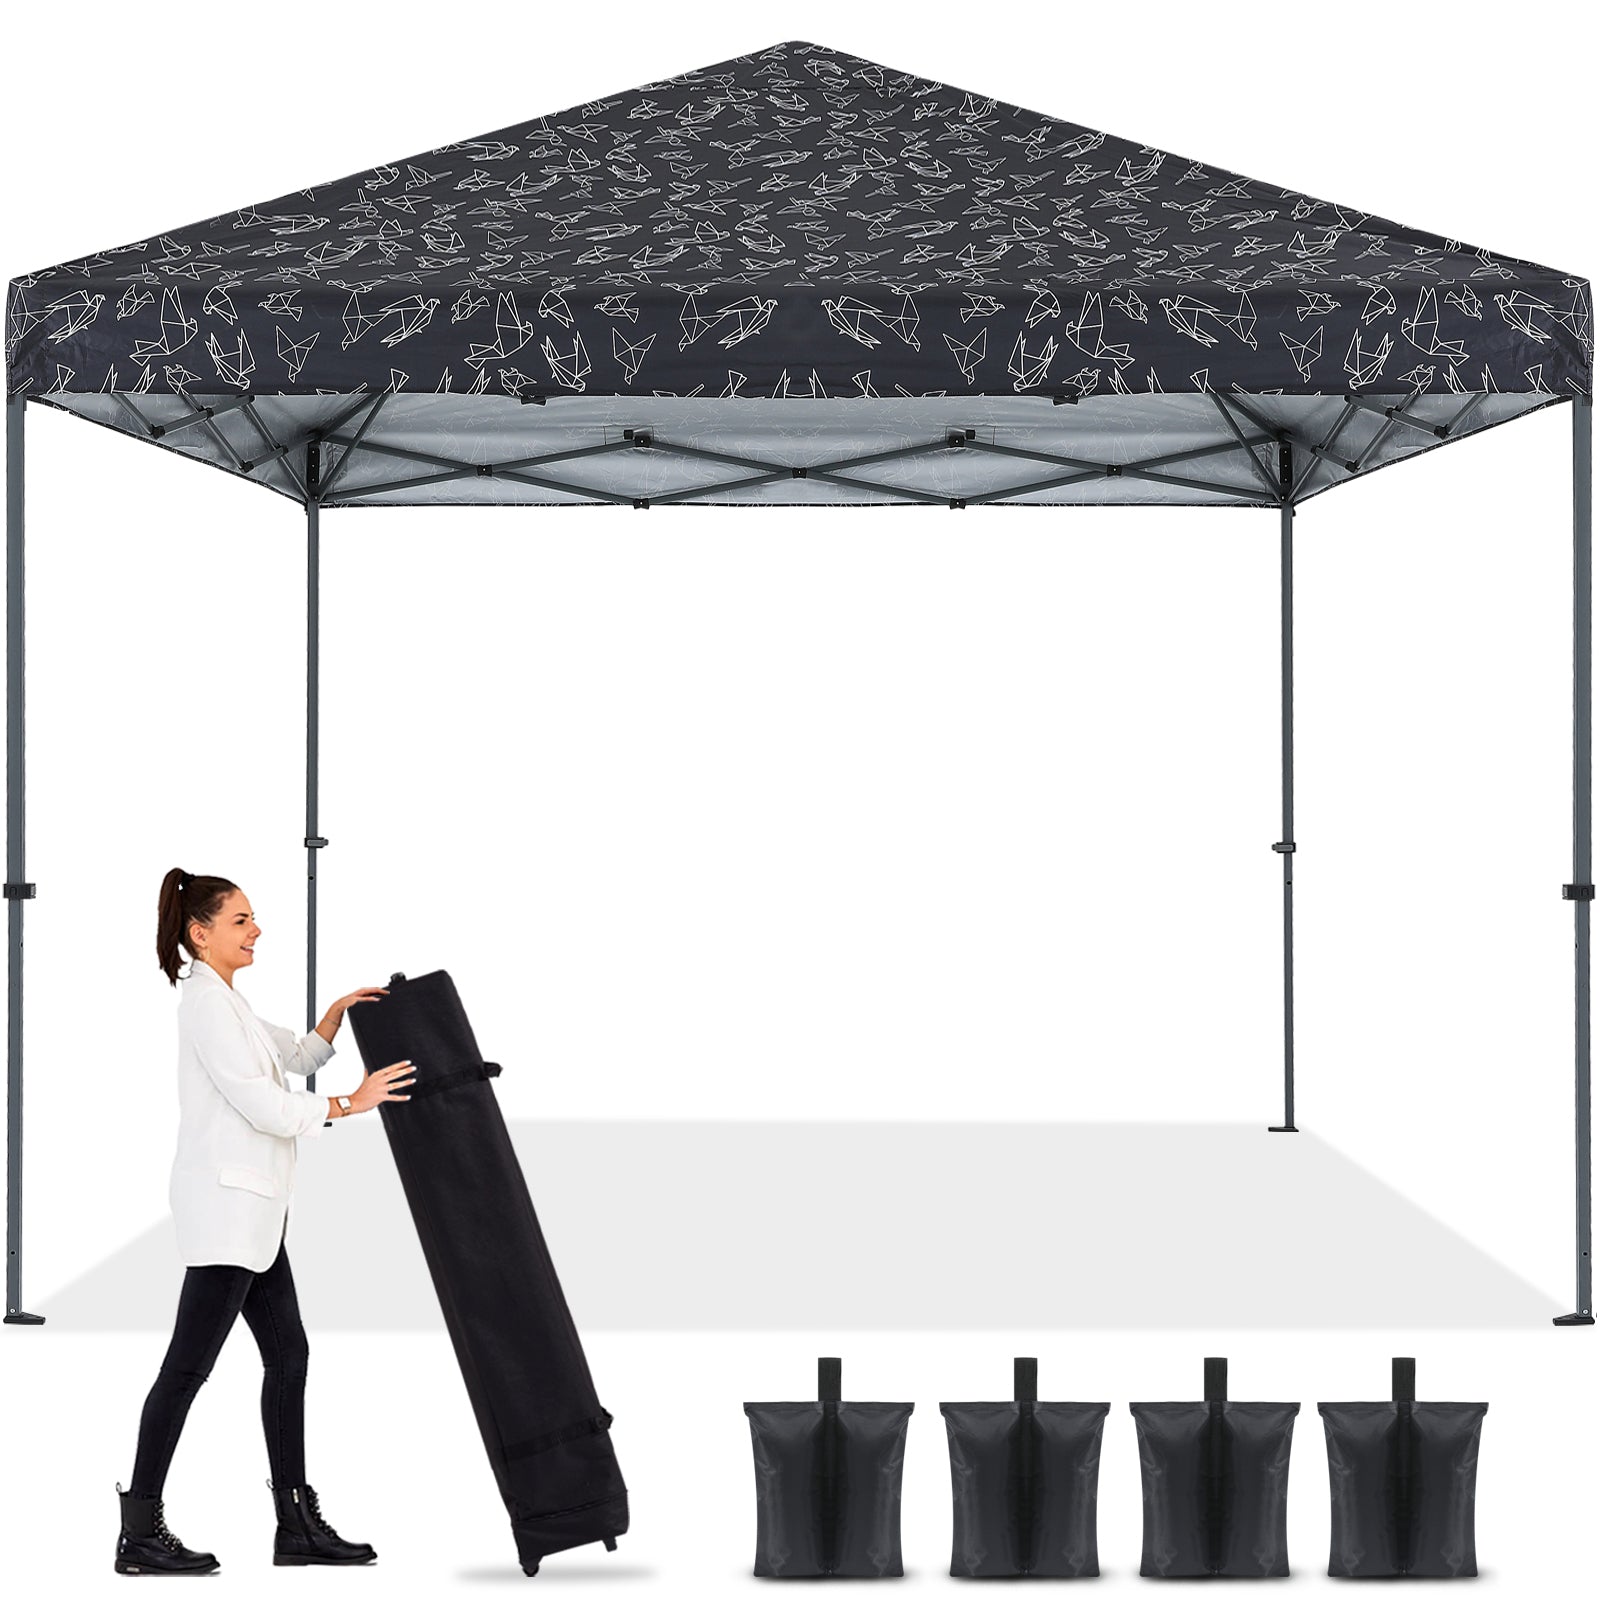 10x10FT Outdoor Easy Pop up Canopy Tent With Graphic Print